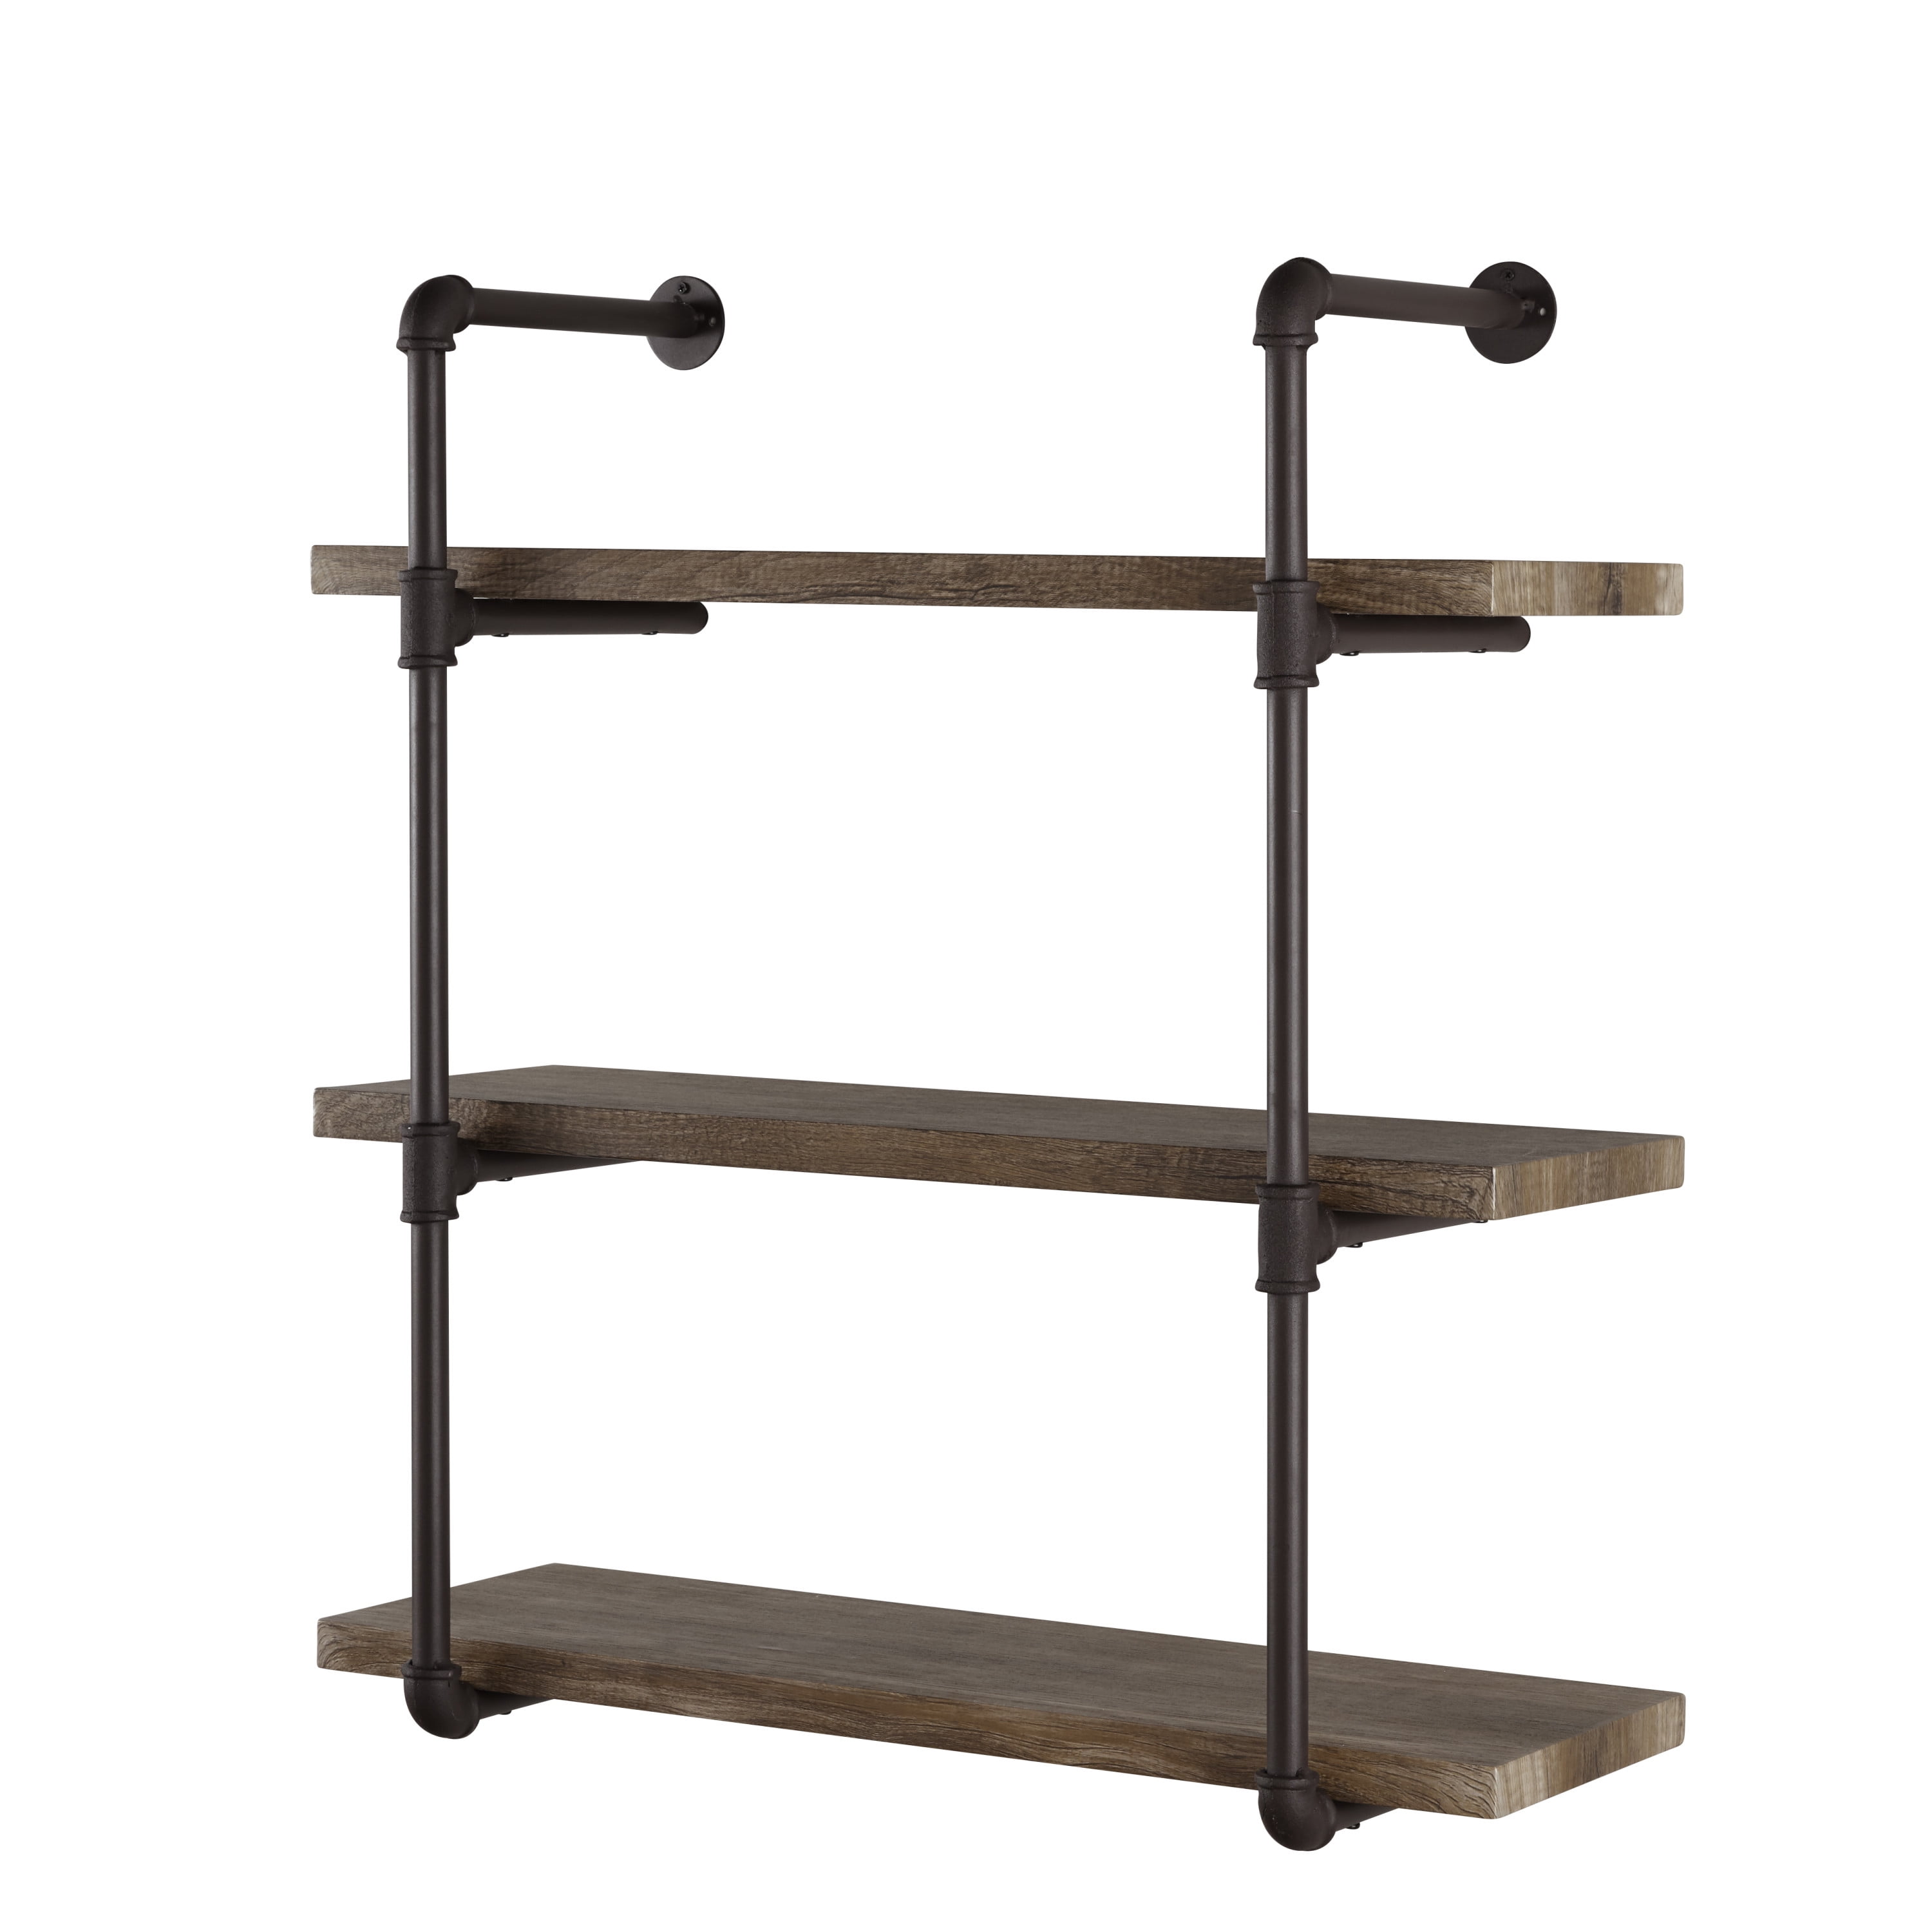 Danya B Three Tier Industrial Pipe, Shelves Made From Plumbing Pipes